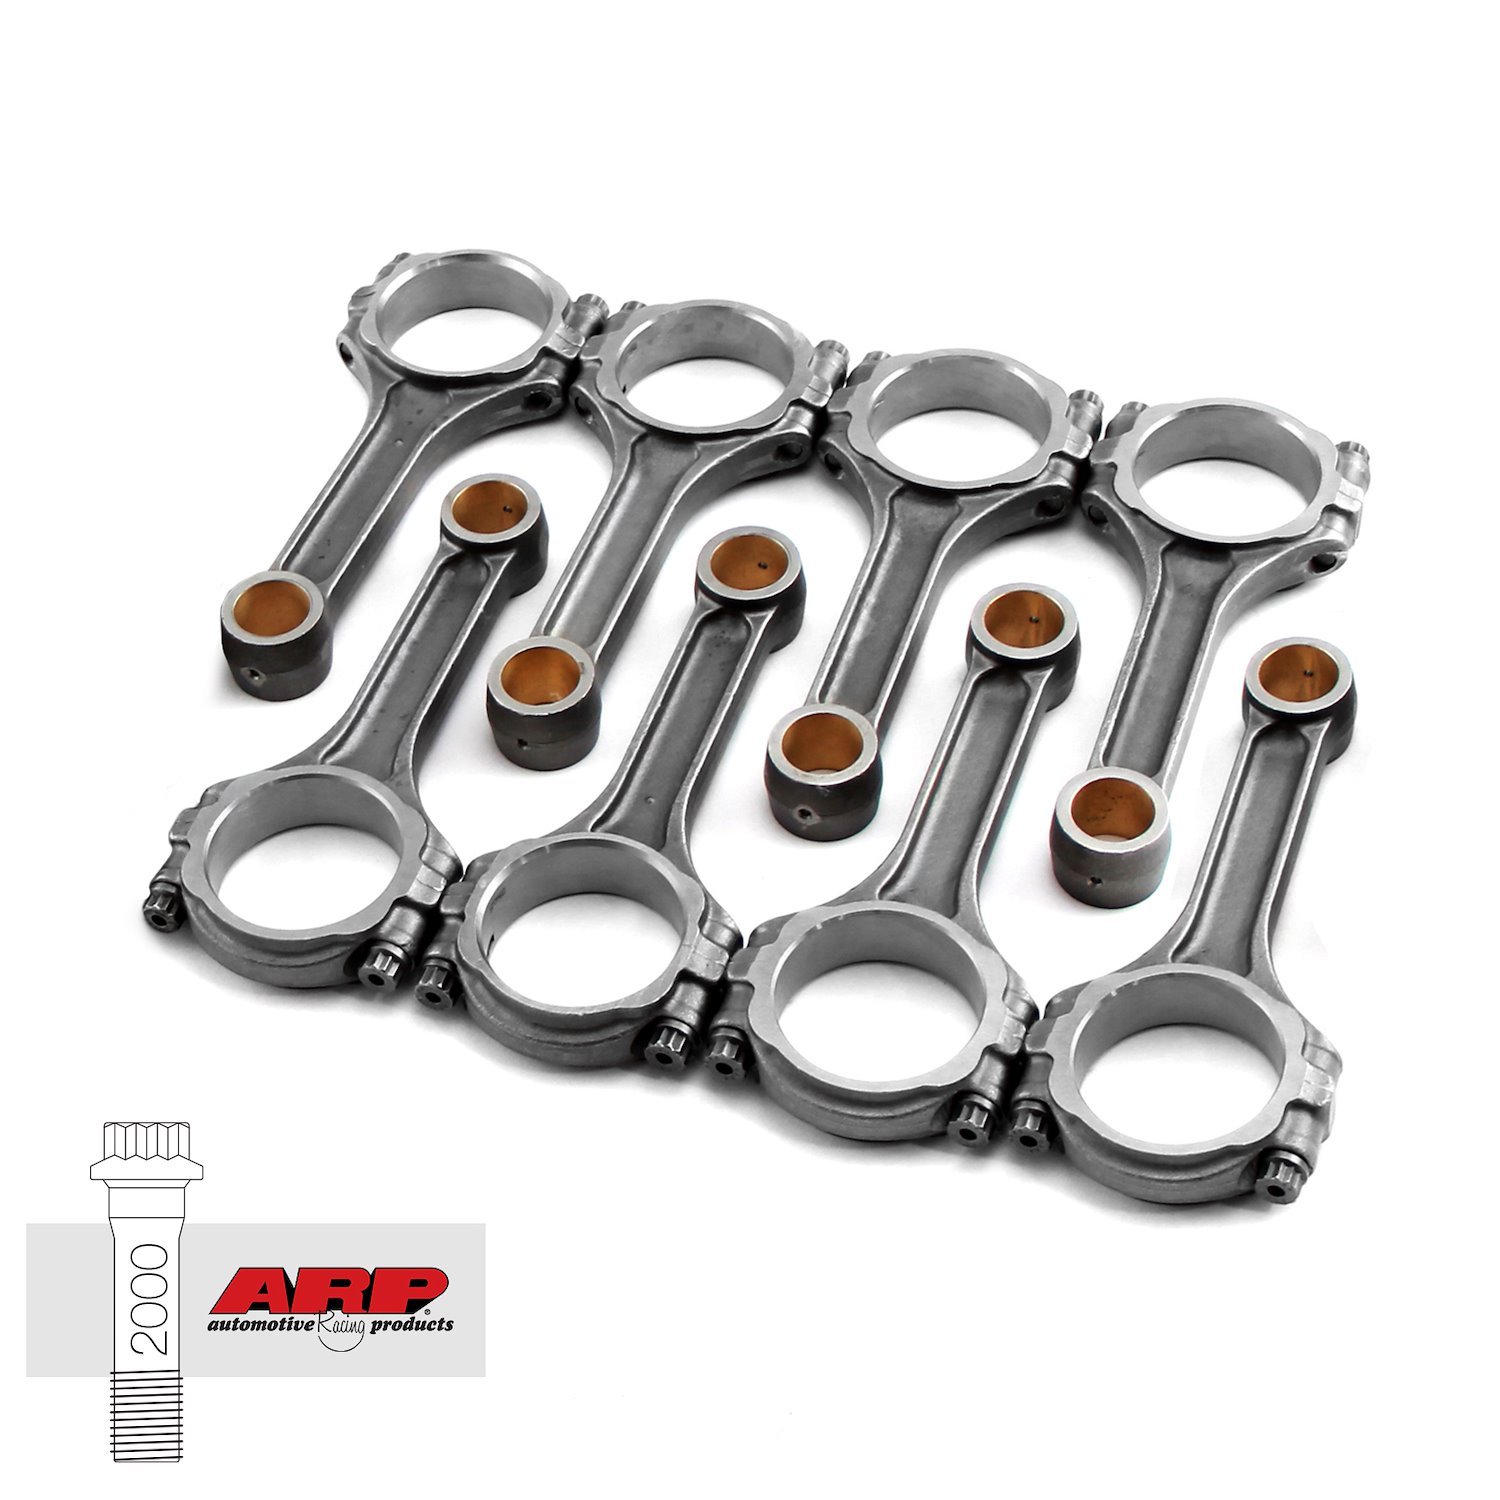 I BEAM 6.385 2.200 .990 5140 CONNECTING RODS